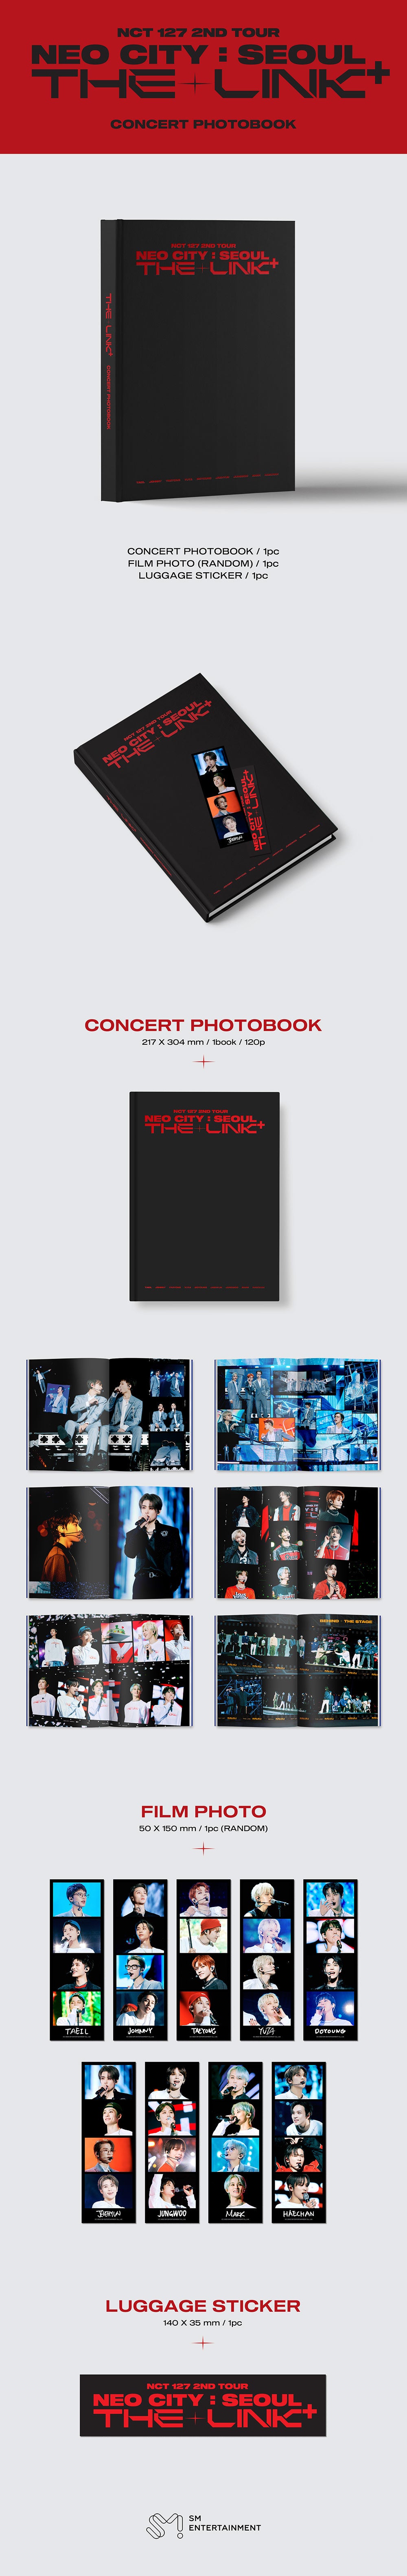 NCT 127 - 2nd Tour NEO CITY : SEOUL THE LINK [Concert Photobook]